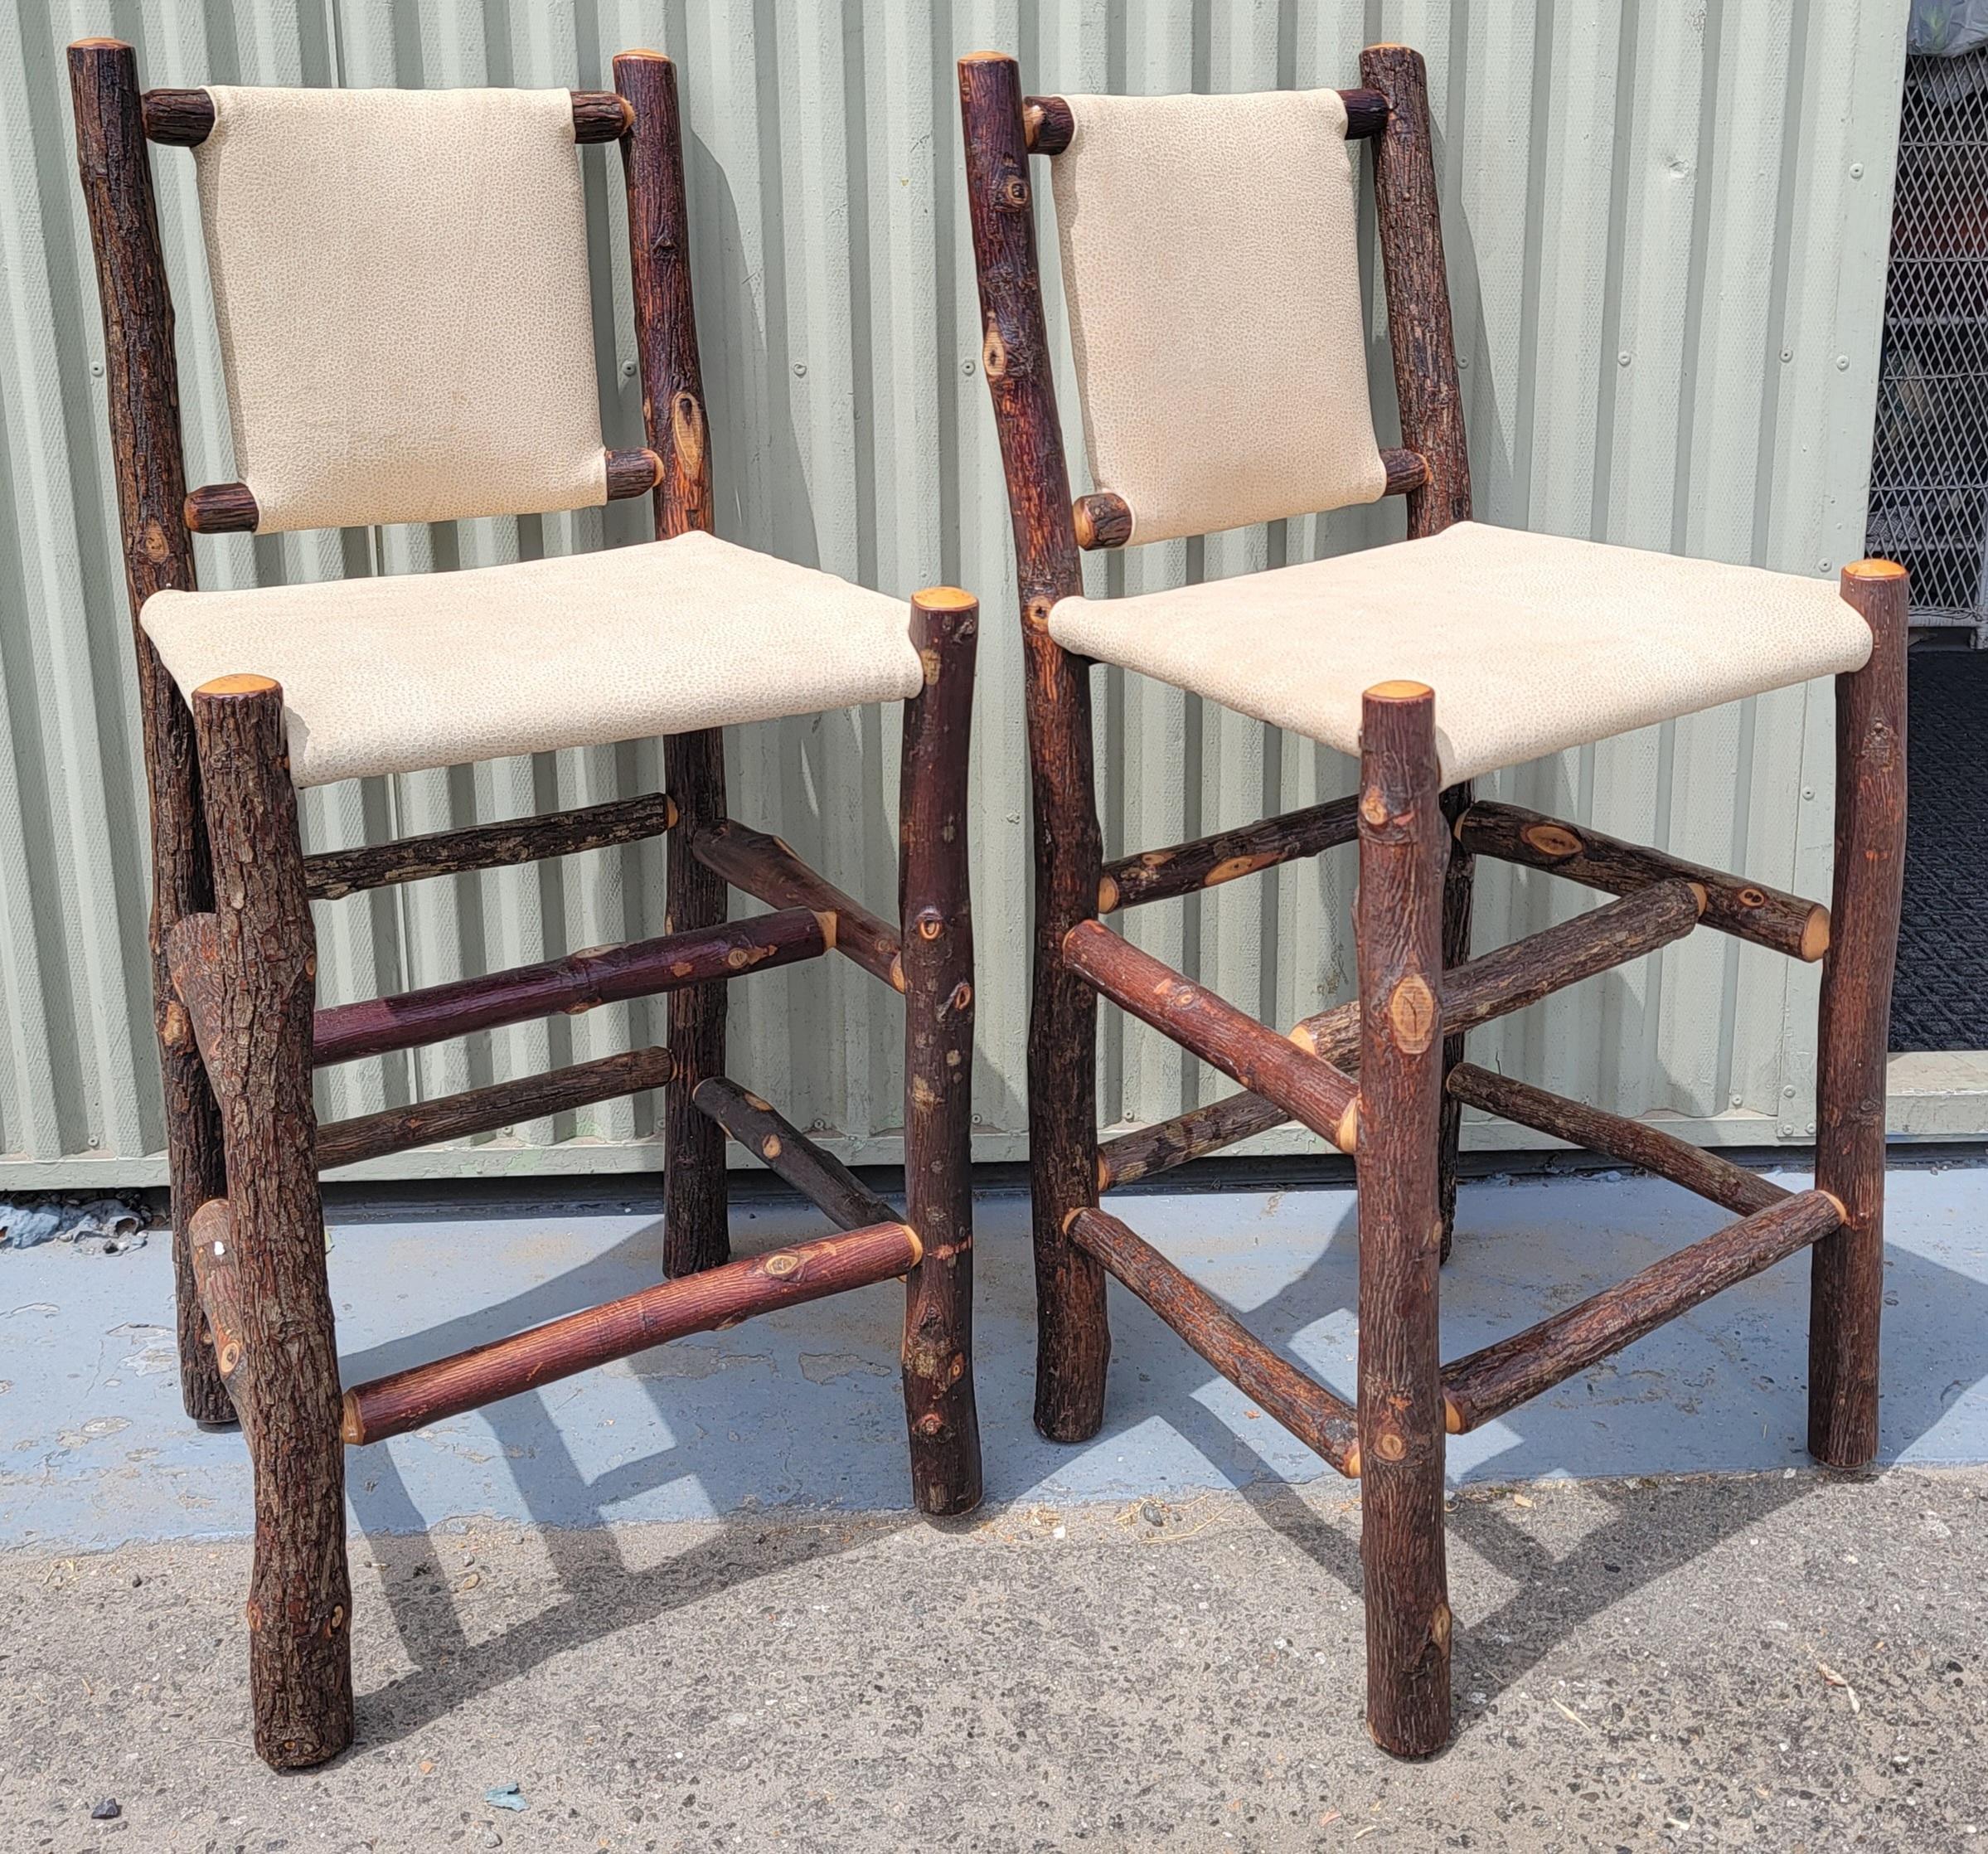 Mid-20th Century Rare Old Hickory Bar Stools W/ Leather Seats & Backs-Pair For Sale